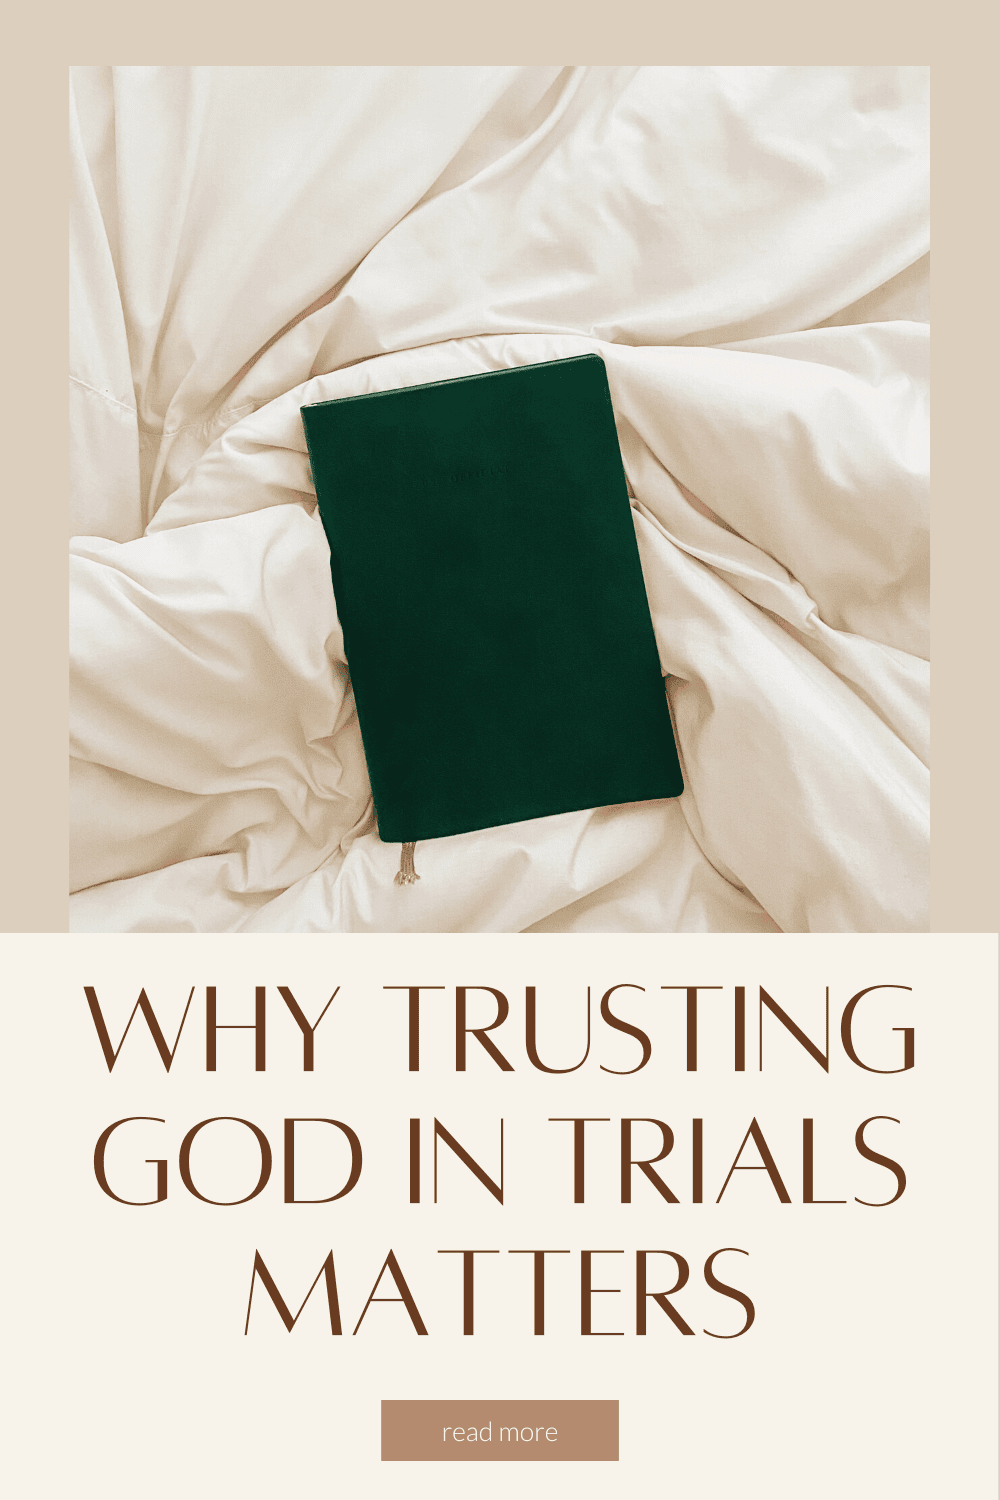 Why Trusting God Through Trials Matters Pinterest image